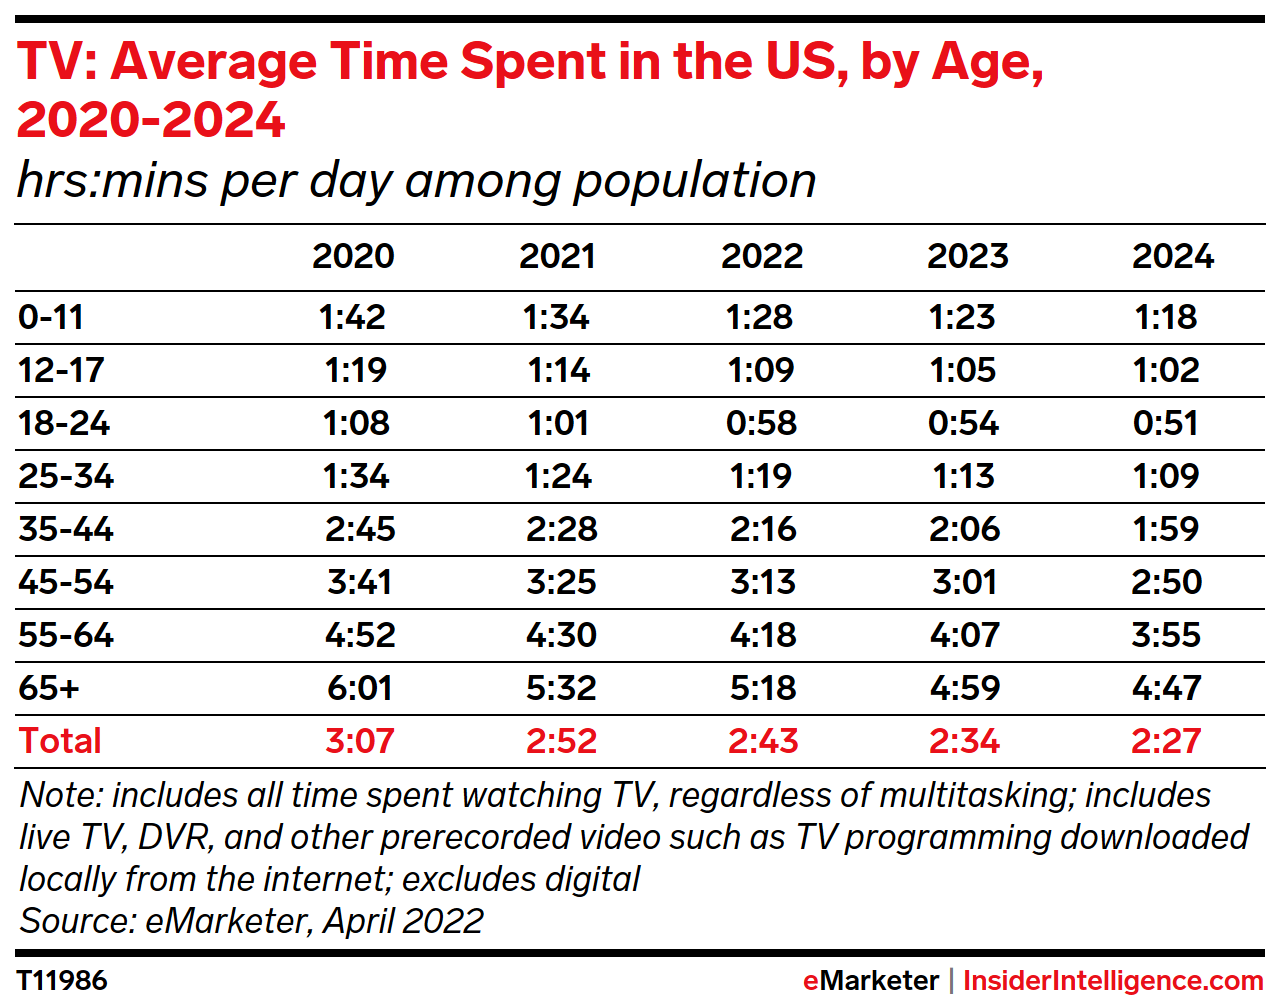 TV: Average Time Spent in the US, by Age, 2020-2024 (hrs:mins per day among population)